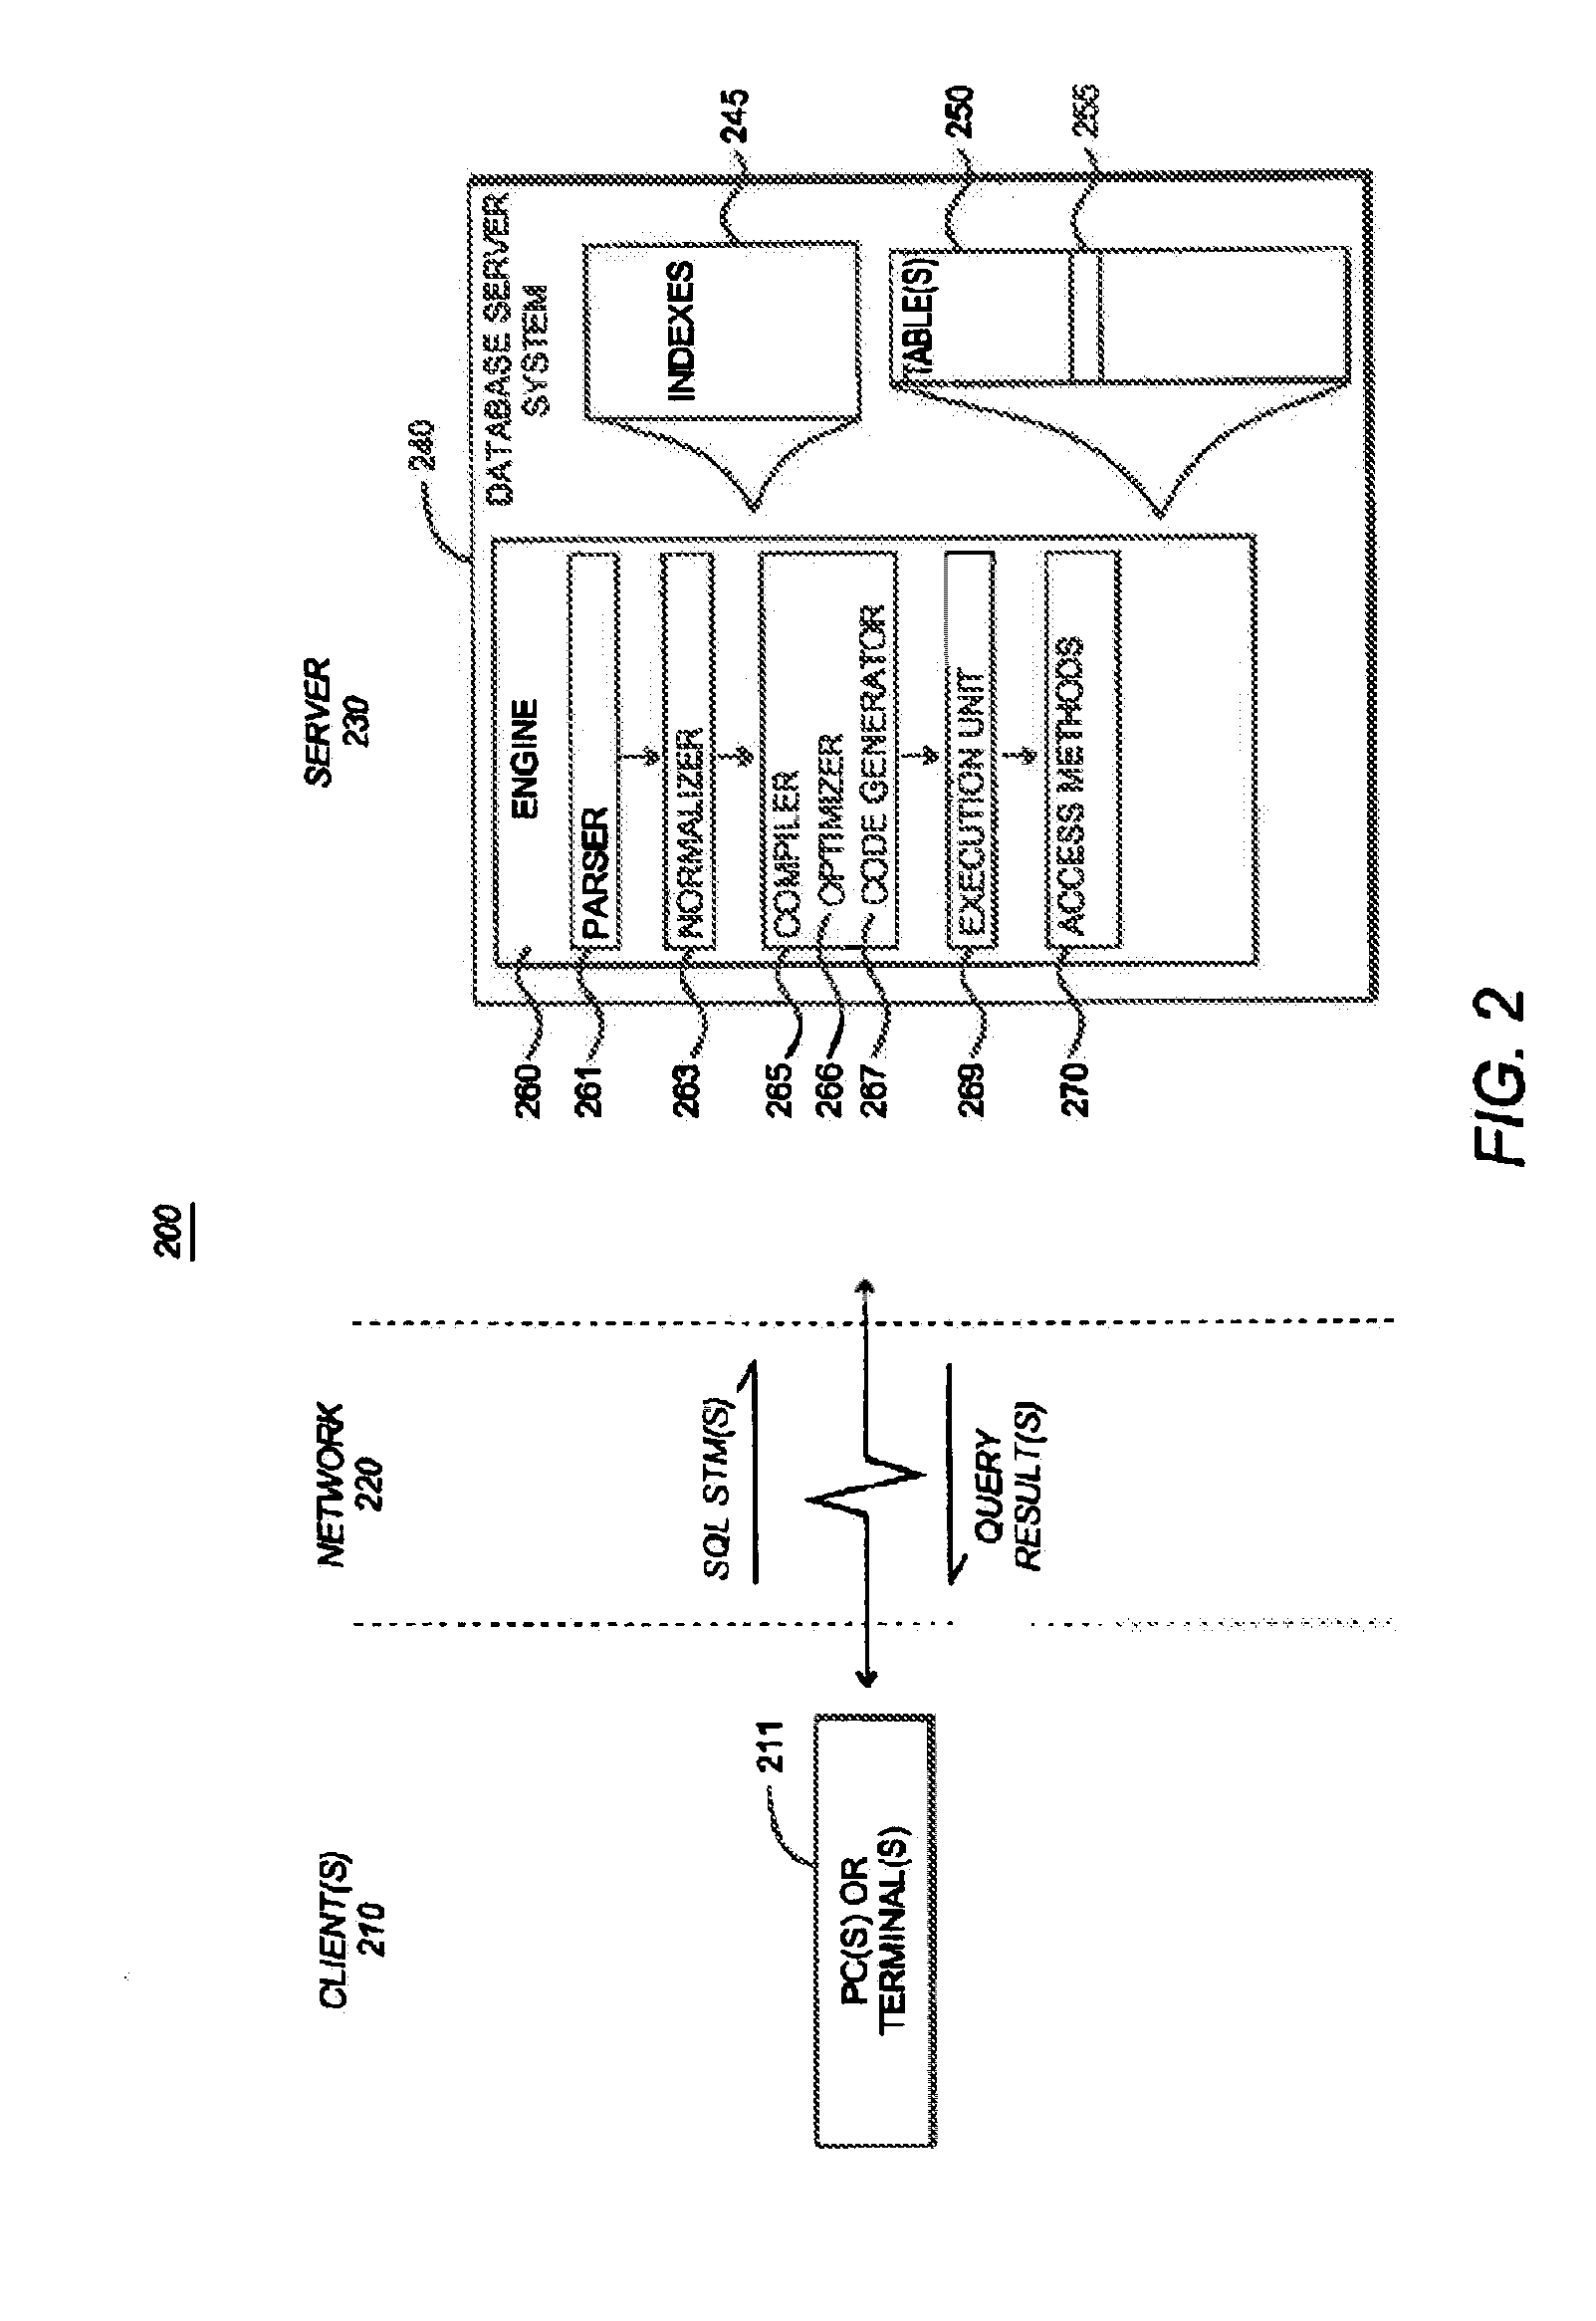 Optimizing data storage and access of an in-memory database